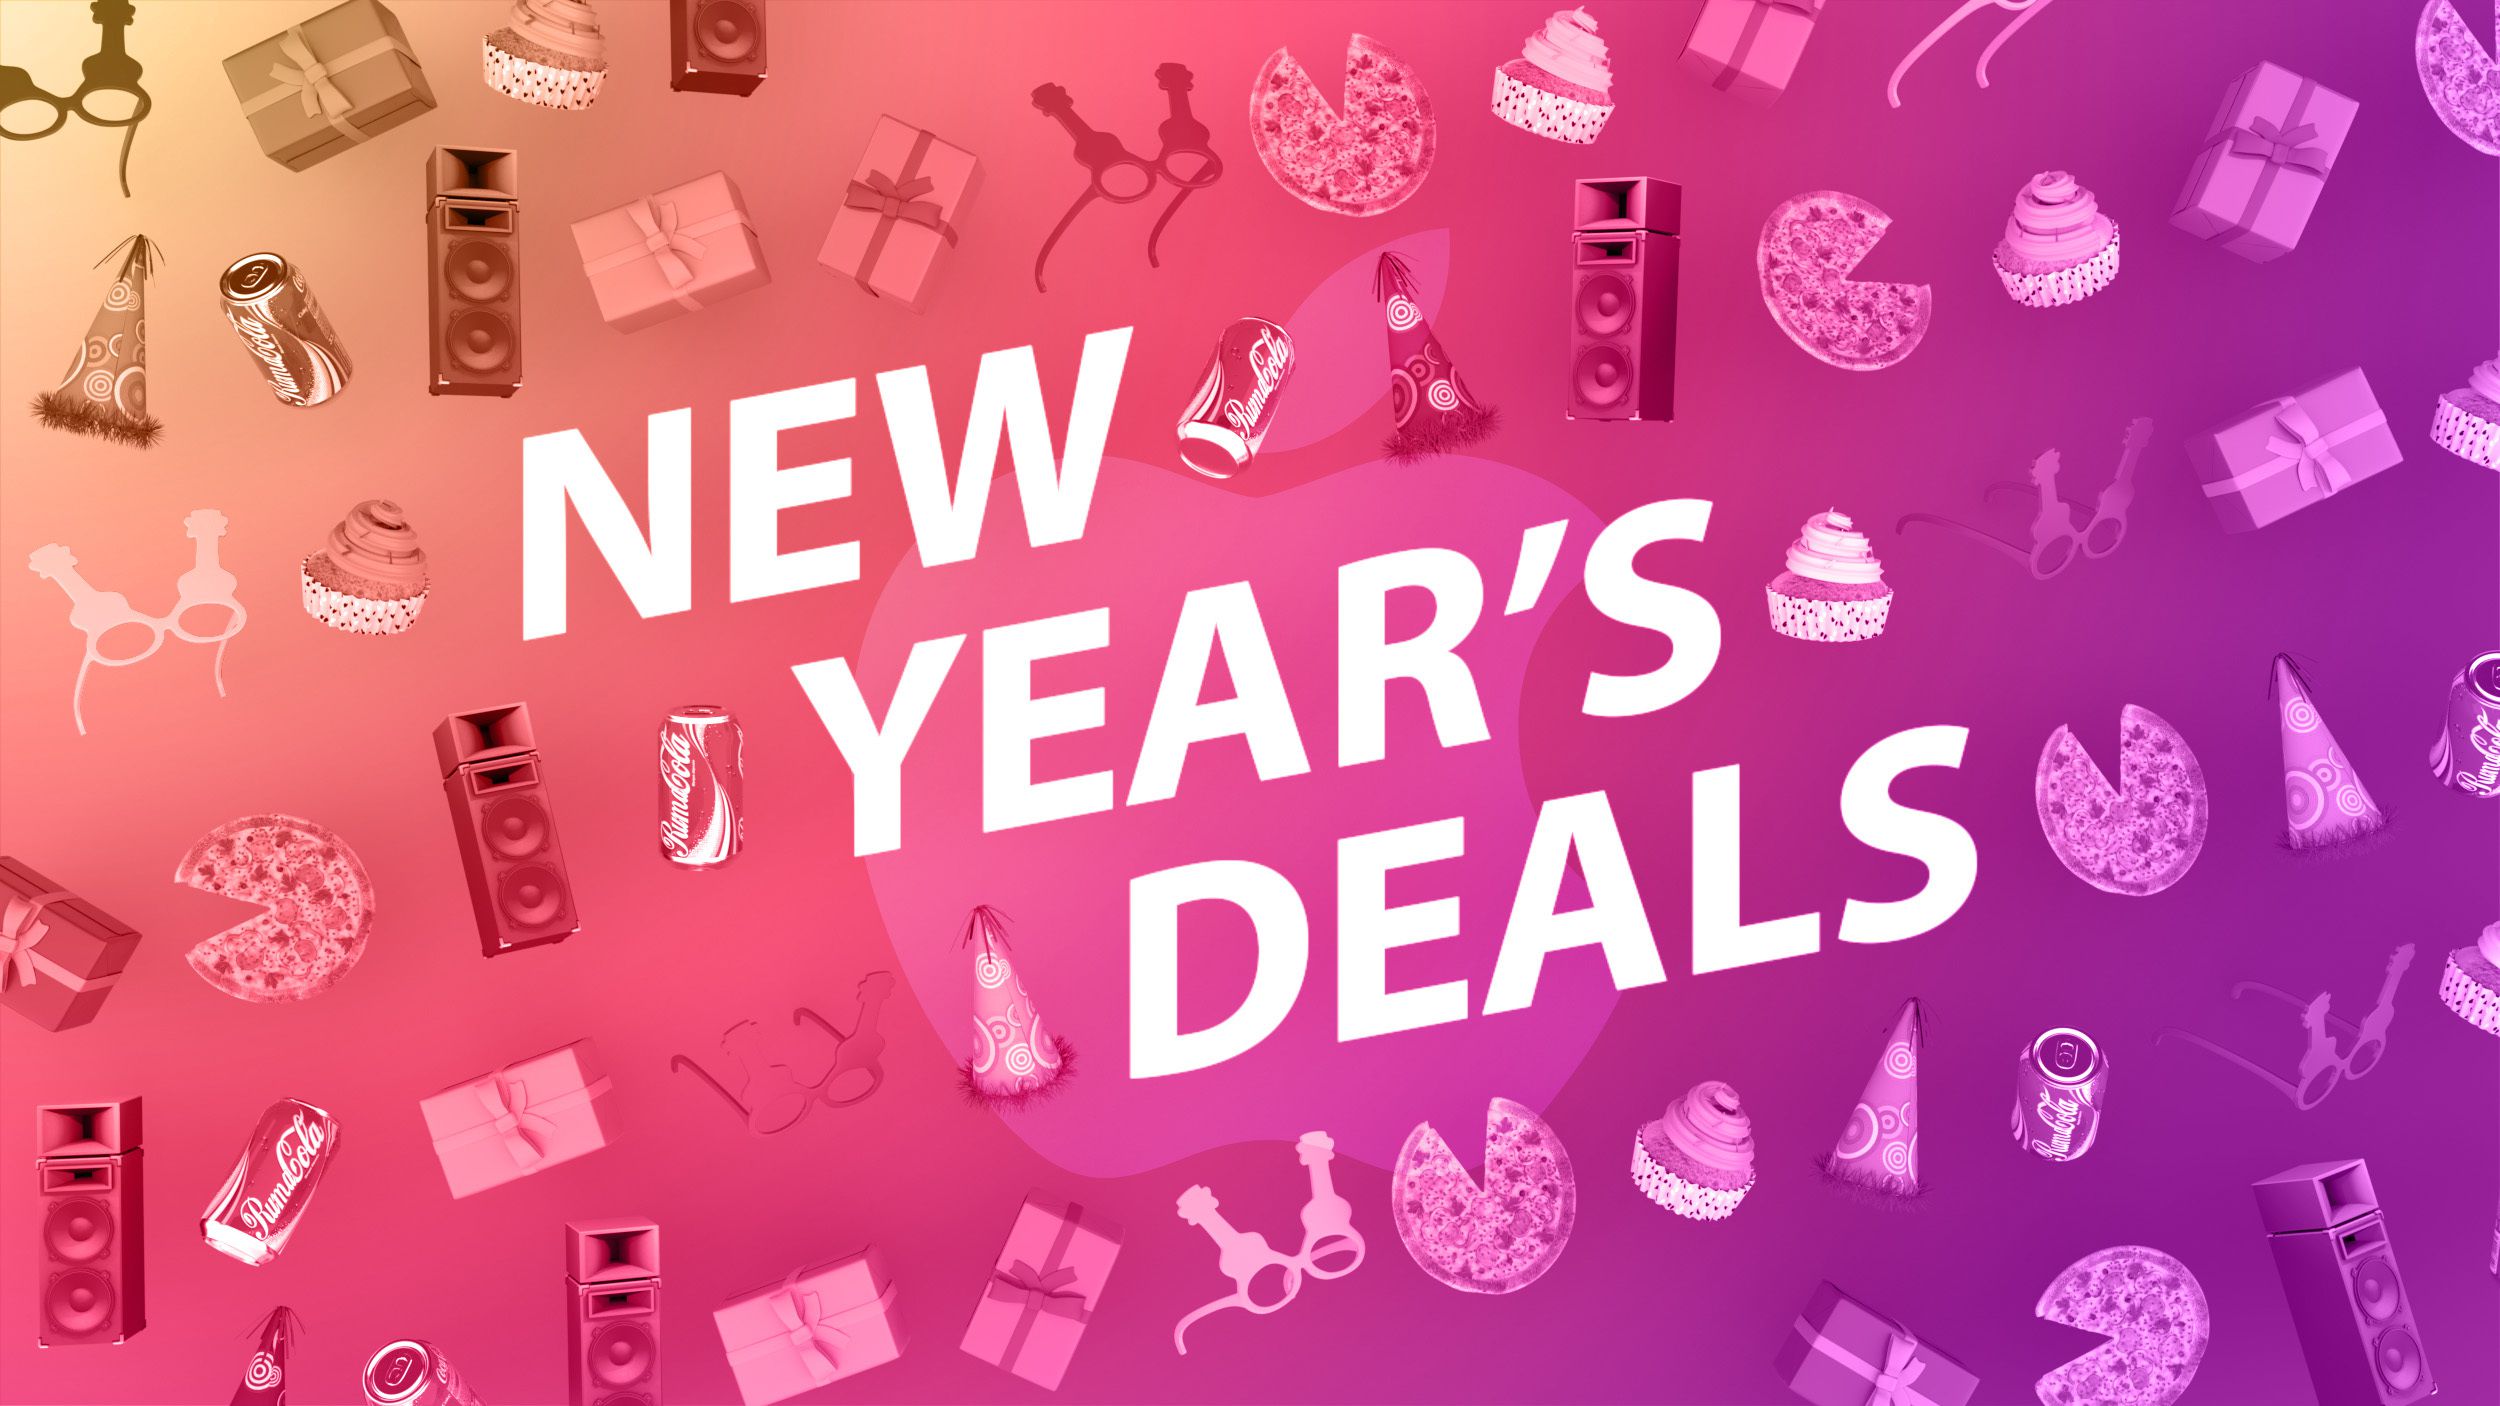 New Year's Deals: Shop the Best Year-End Discounts on Apple Accessories From Nomad, Brydge, Incase, More